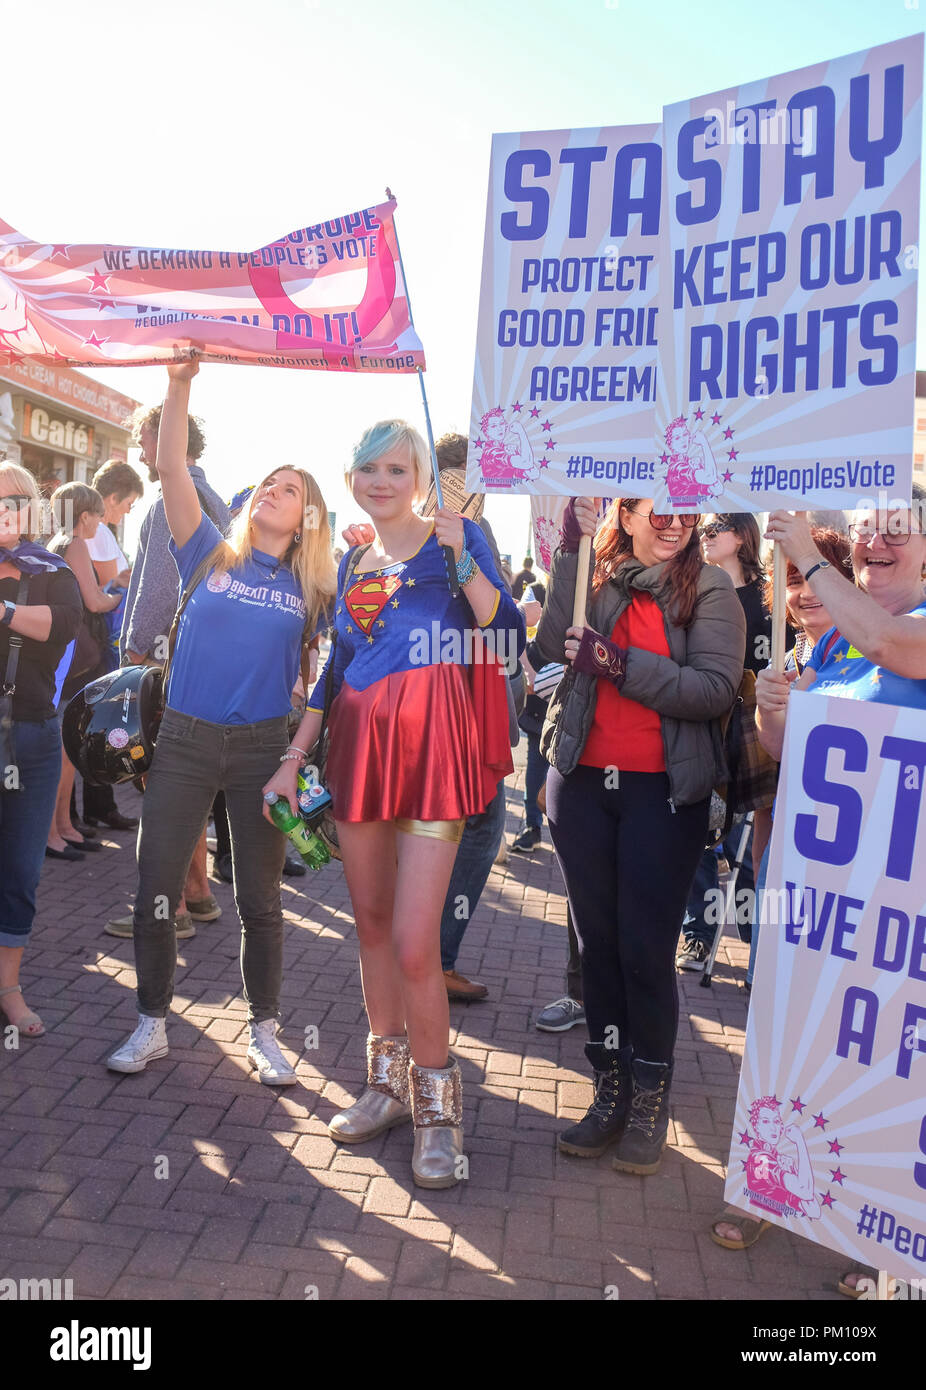 Brighton, UK. 16 September 2018. Anti Brexit protesters march along Brighton seafront to the Conference Centre where the Lib Dems are holding their annual conference . Members of various women groups were joined by members of the Labour Party  , Green Party and Lib Dems for the protest march Credit: Simon Dack/Alamy Live News Stock Photo